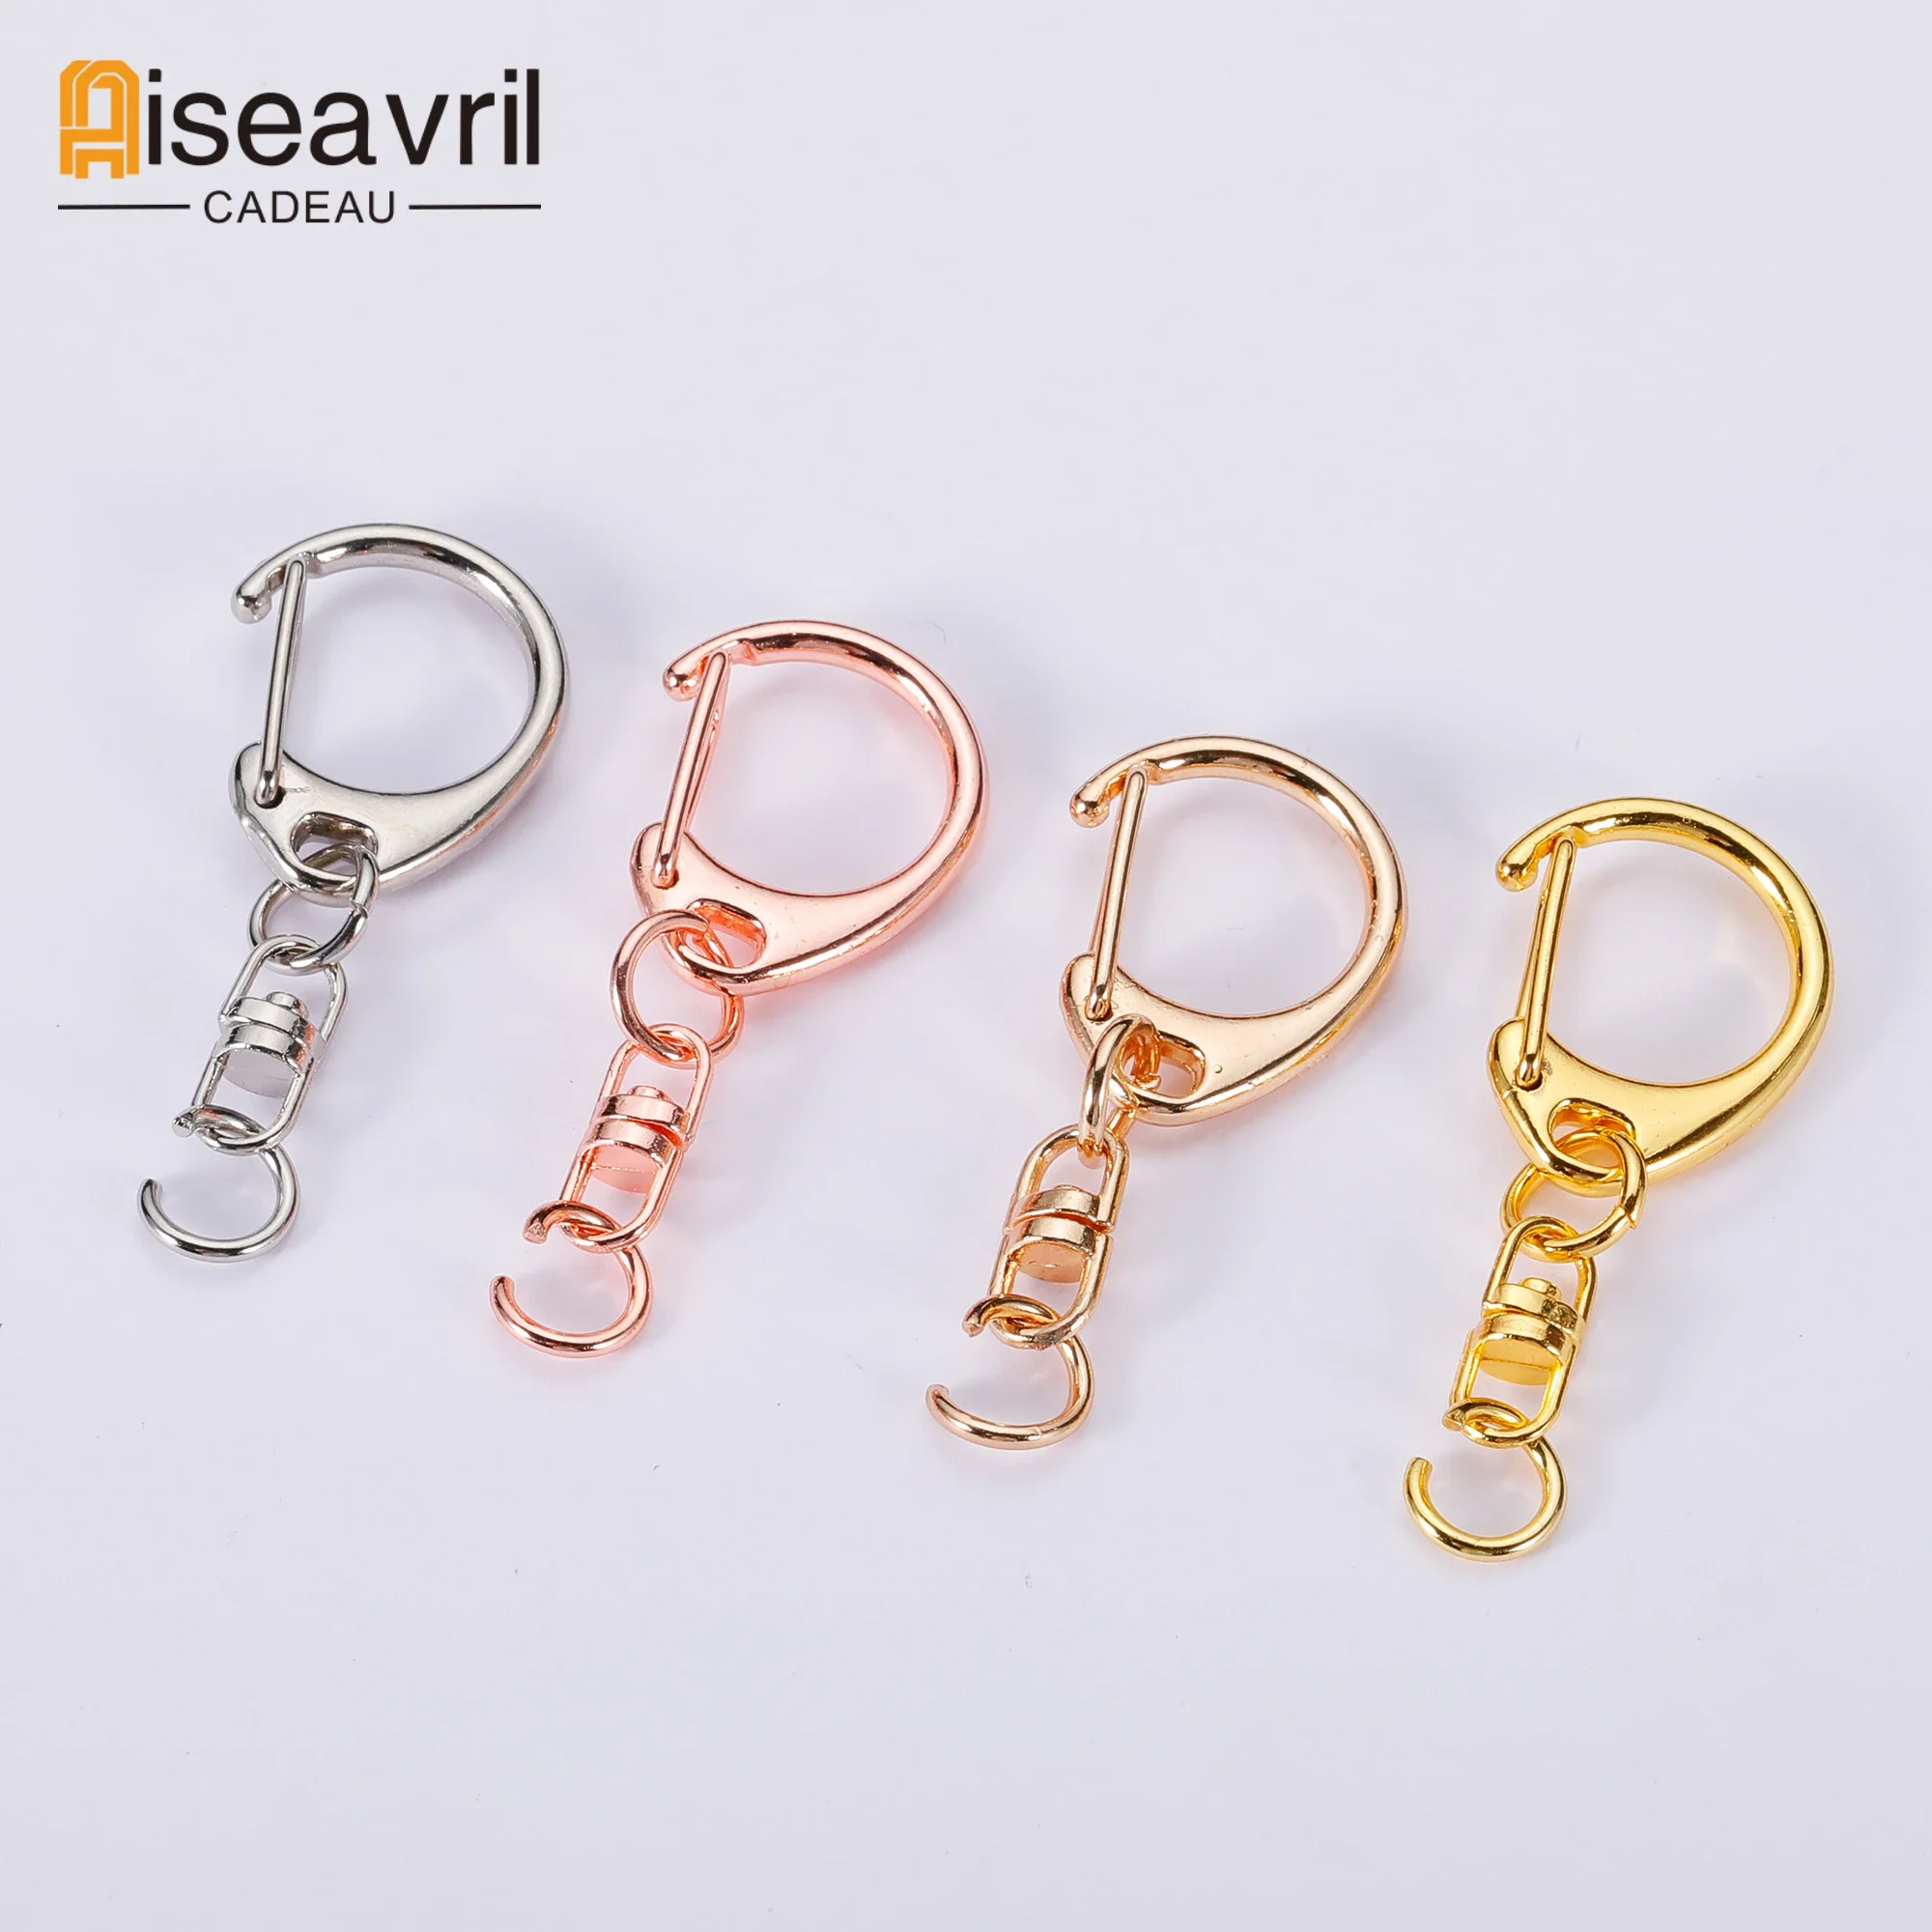 

100pcs Metal Swivel Trigger Lobster Clasps Clip Snap Hook Key Chain Ring Craft Bag Parts Findings Clasps For Keychains Making